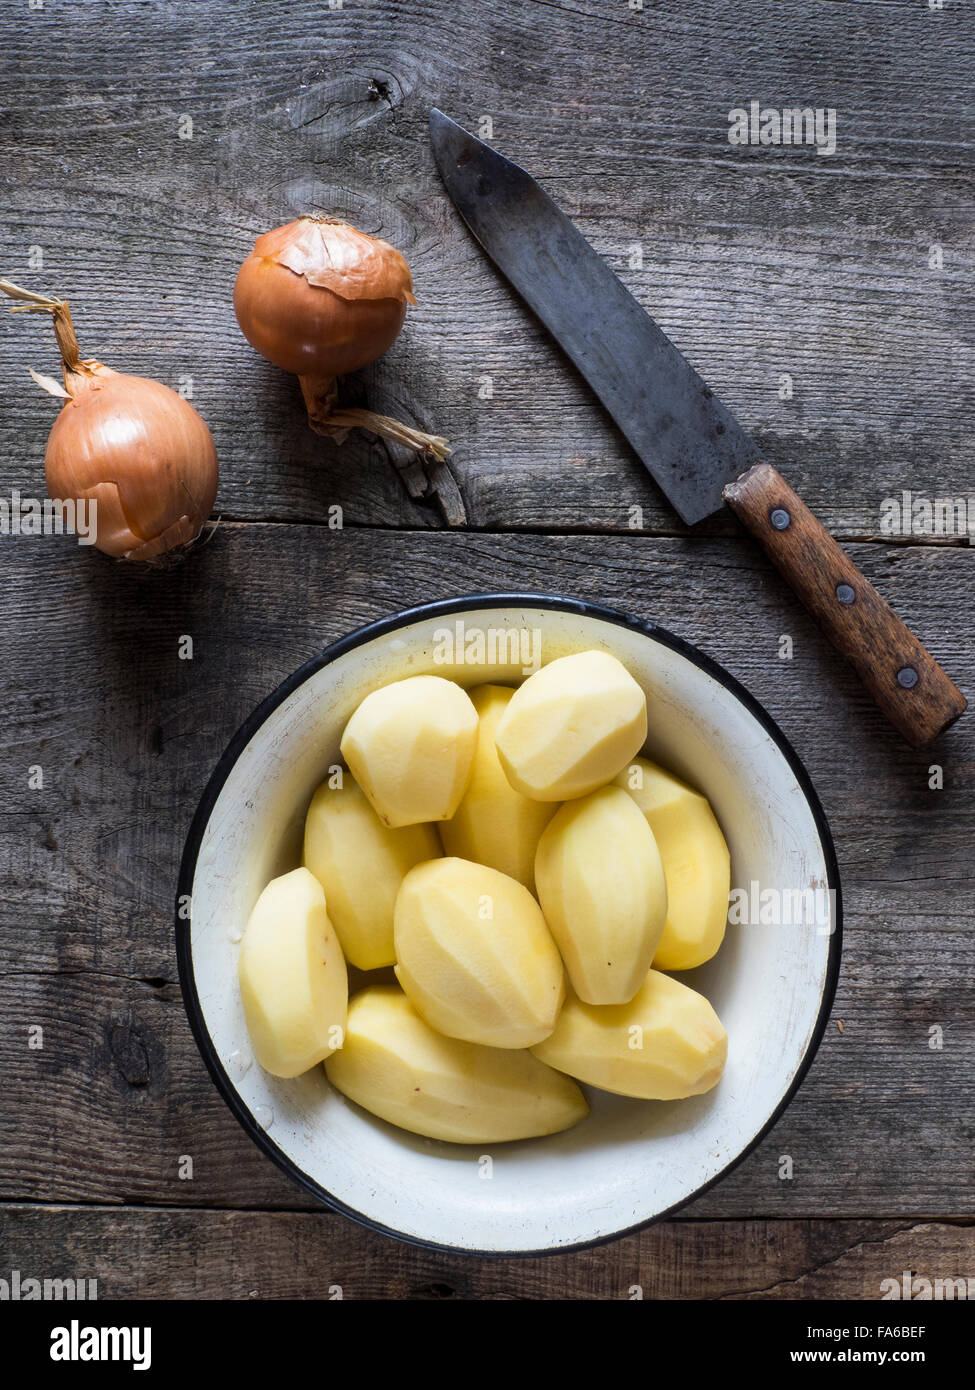 Peeled potatoes, onions and knife on table Stock Photo